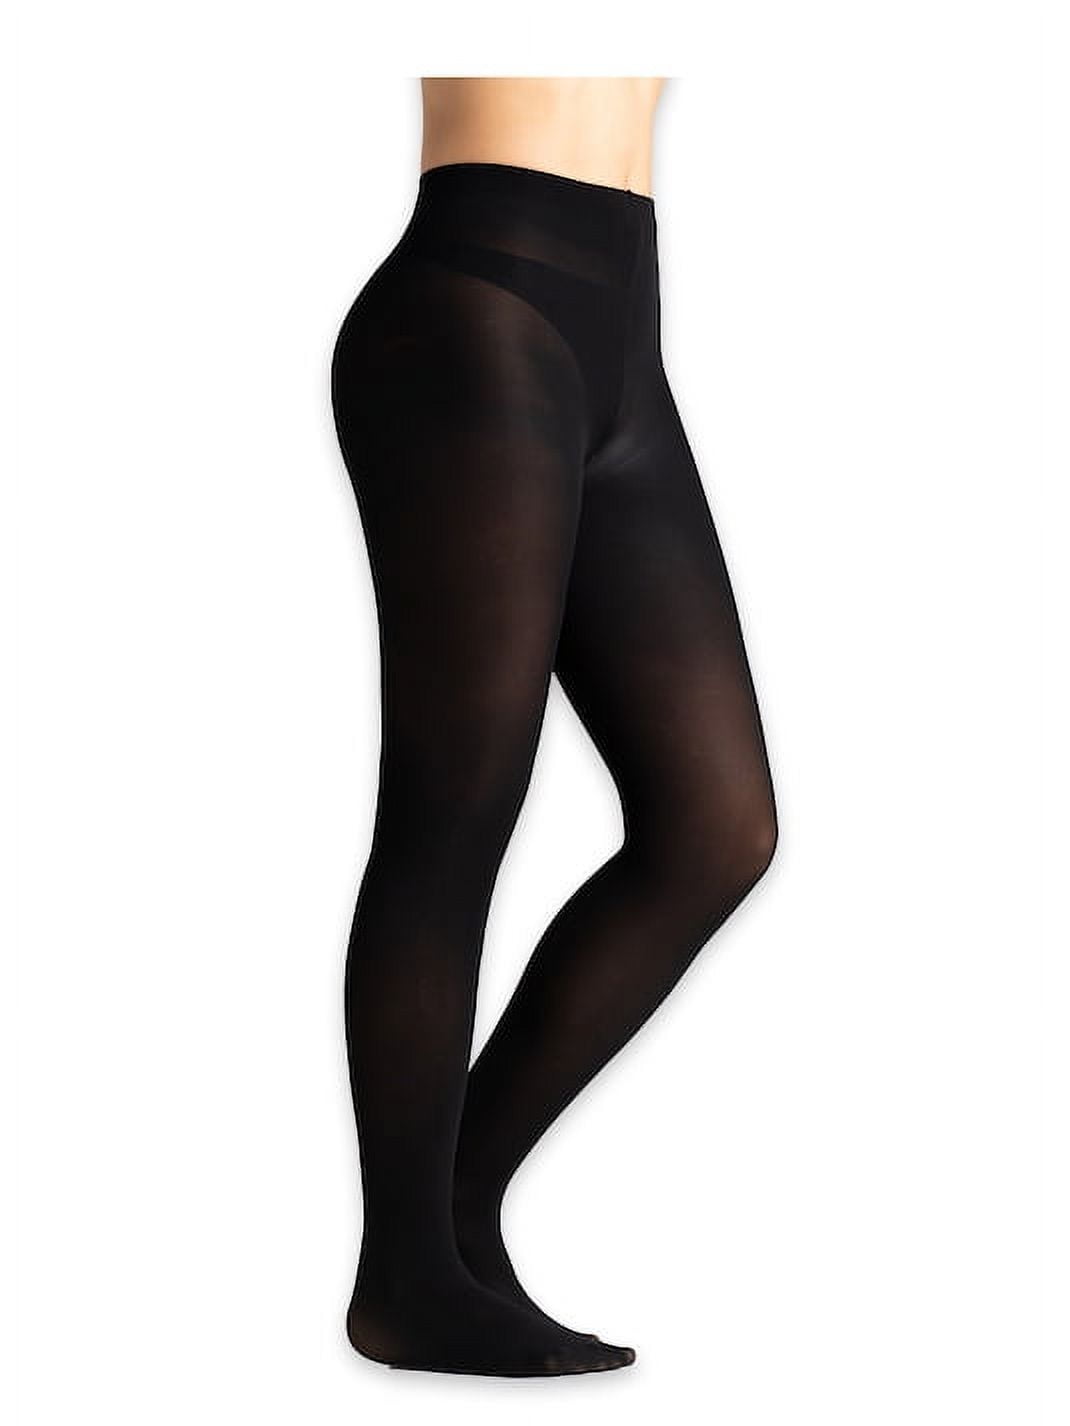 Women's Tights - Opaque Black Tights - LOVALL